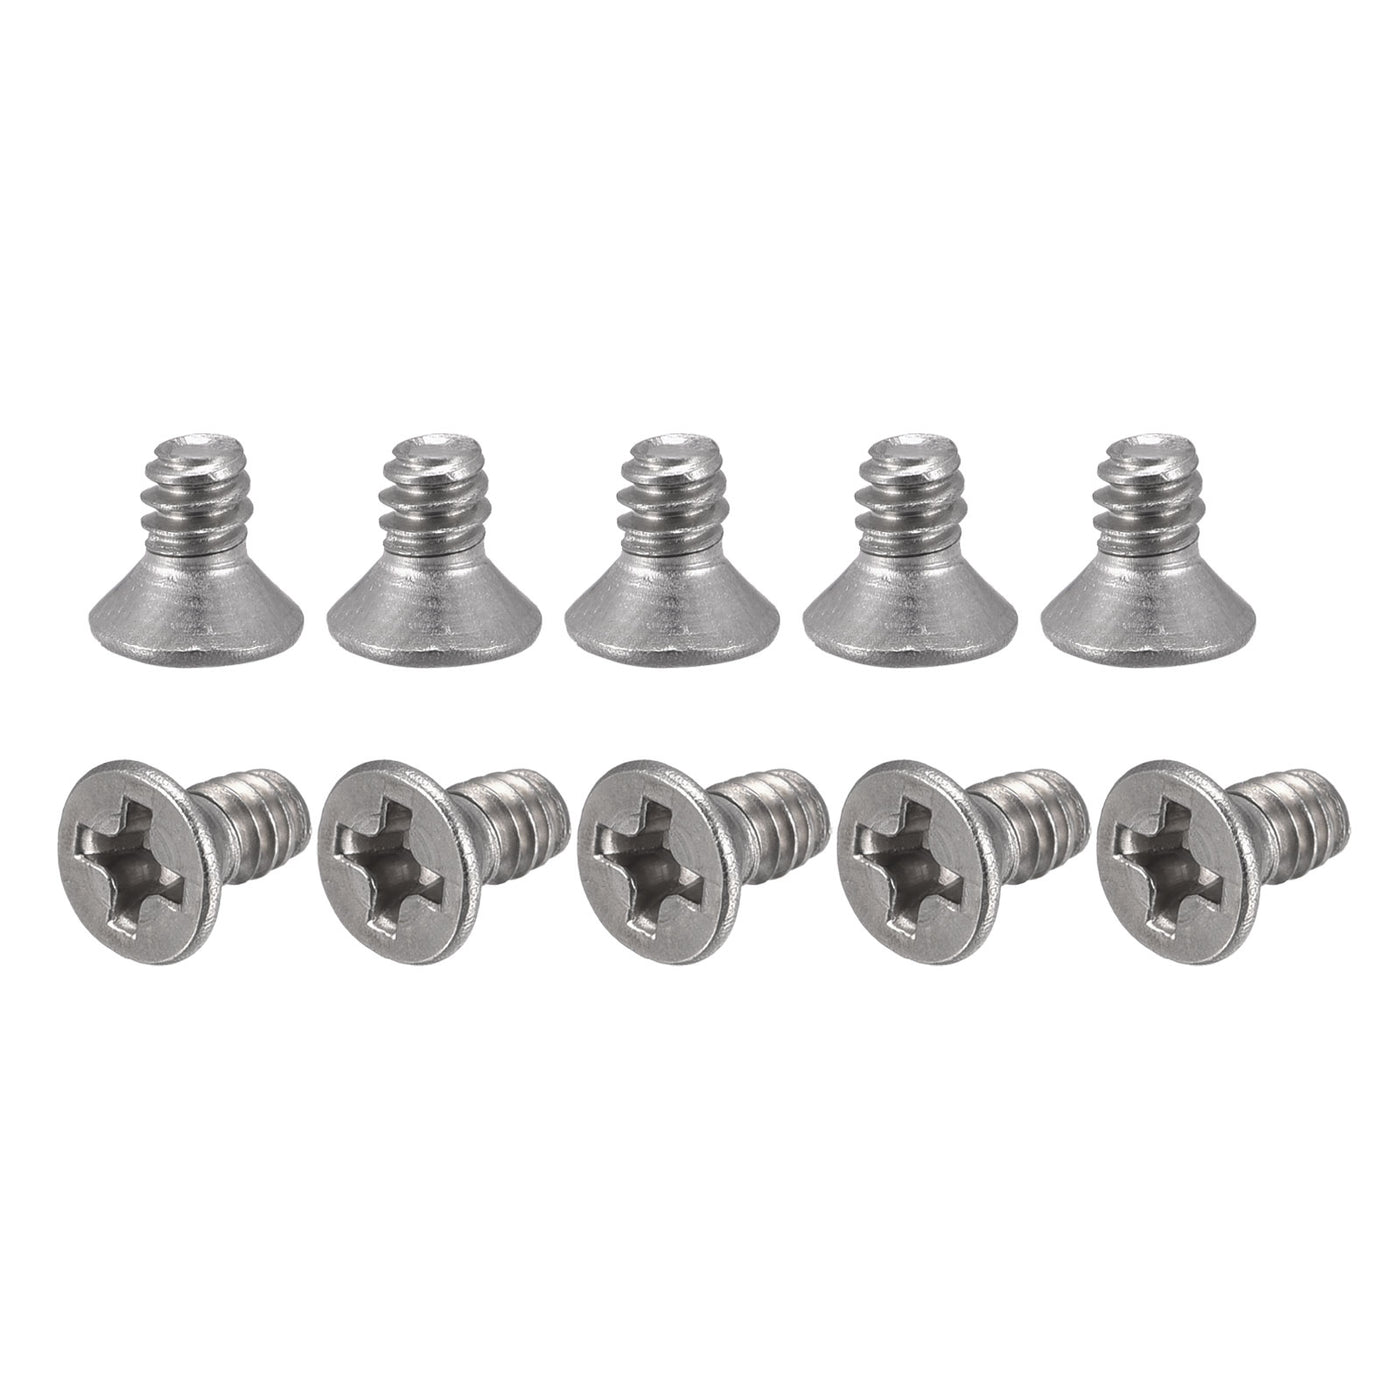 uxcell Uxcell 6#-32x1/4" Flat Head Machine Screws Phillips 304 Stainless Steel Bolts 200pcs